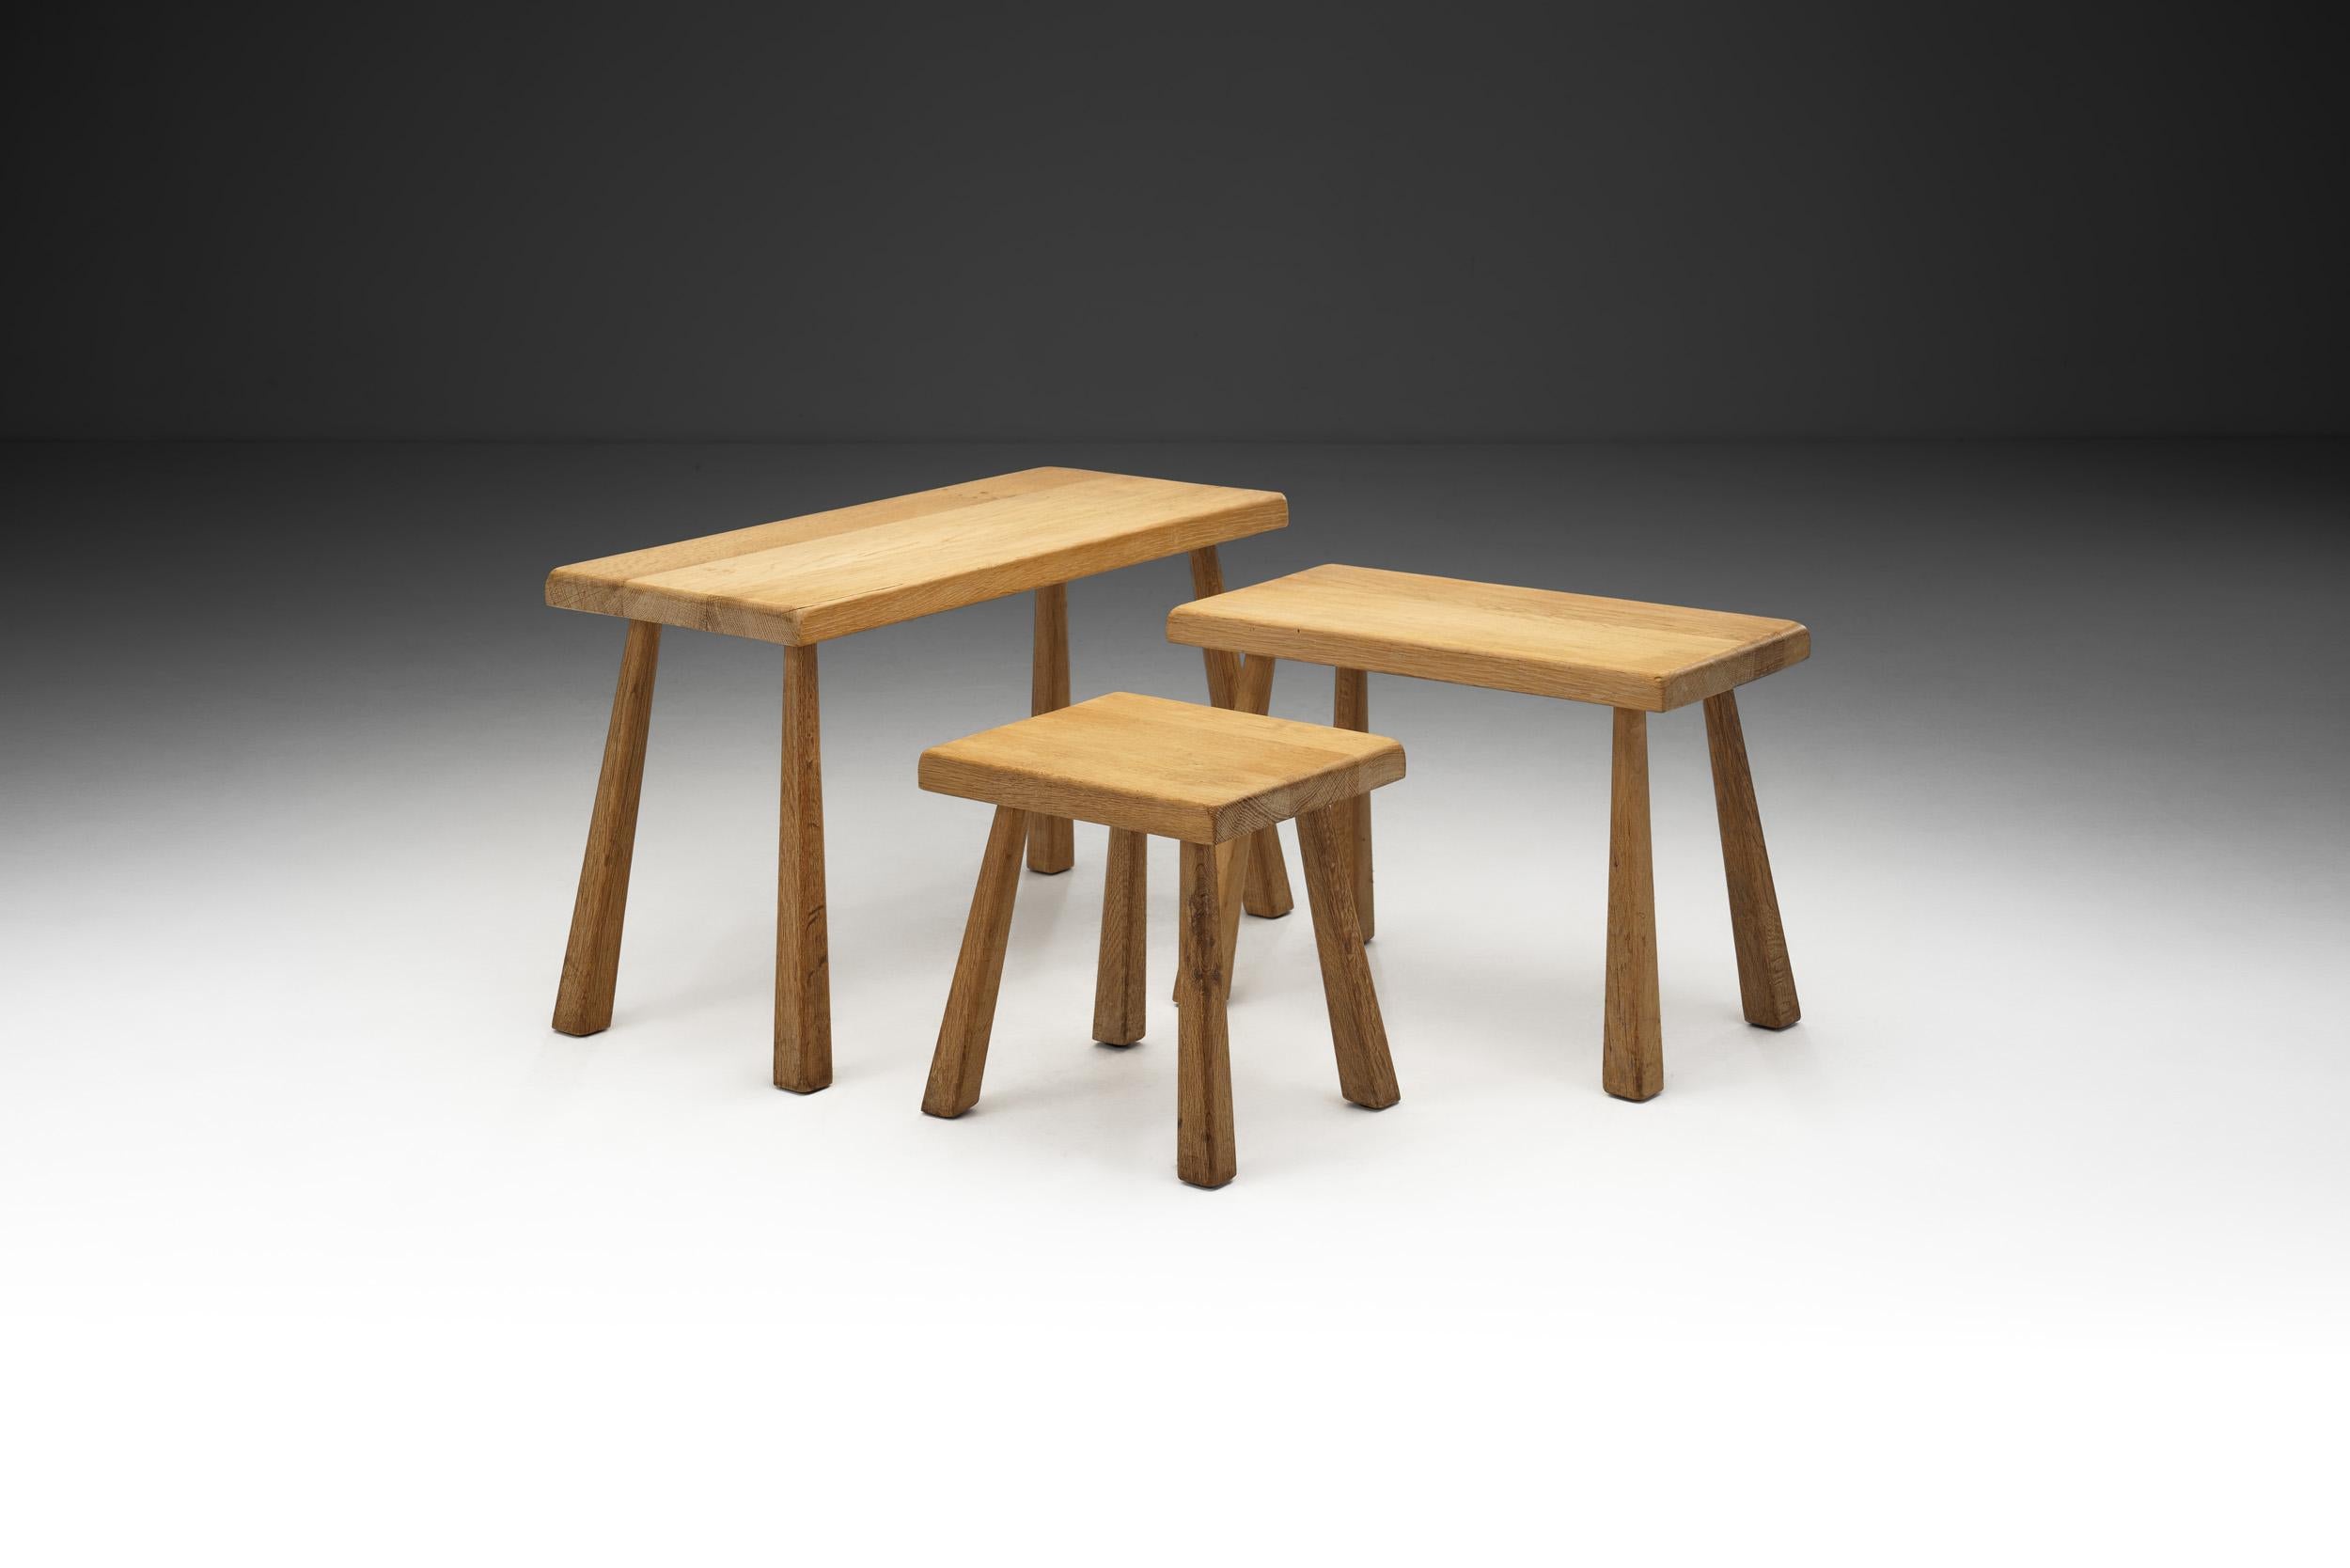 20th Century European Cabinetmaker Solid Oak Nesting Tables, Europe ca 1950s For Sale